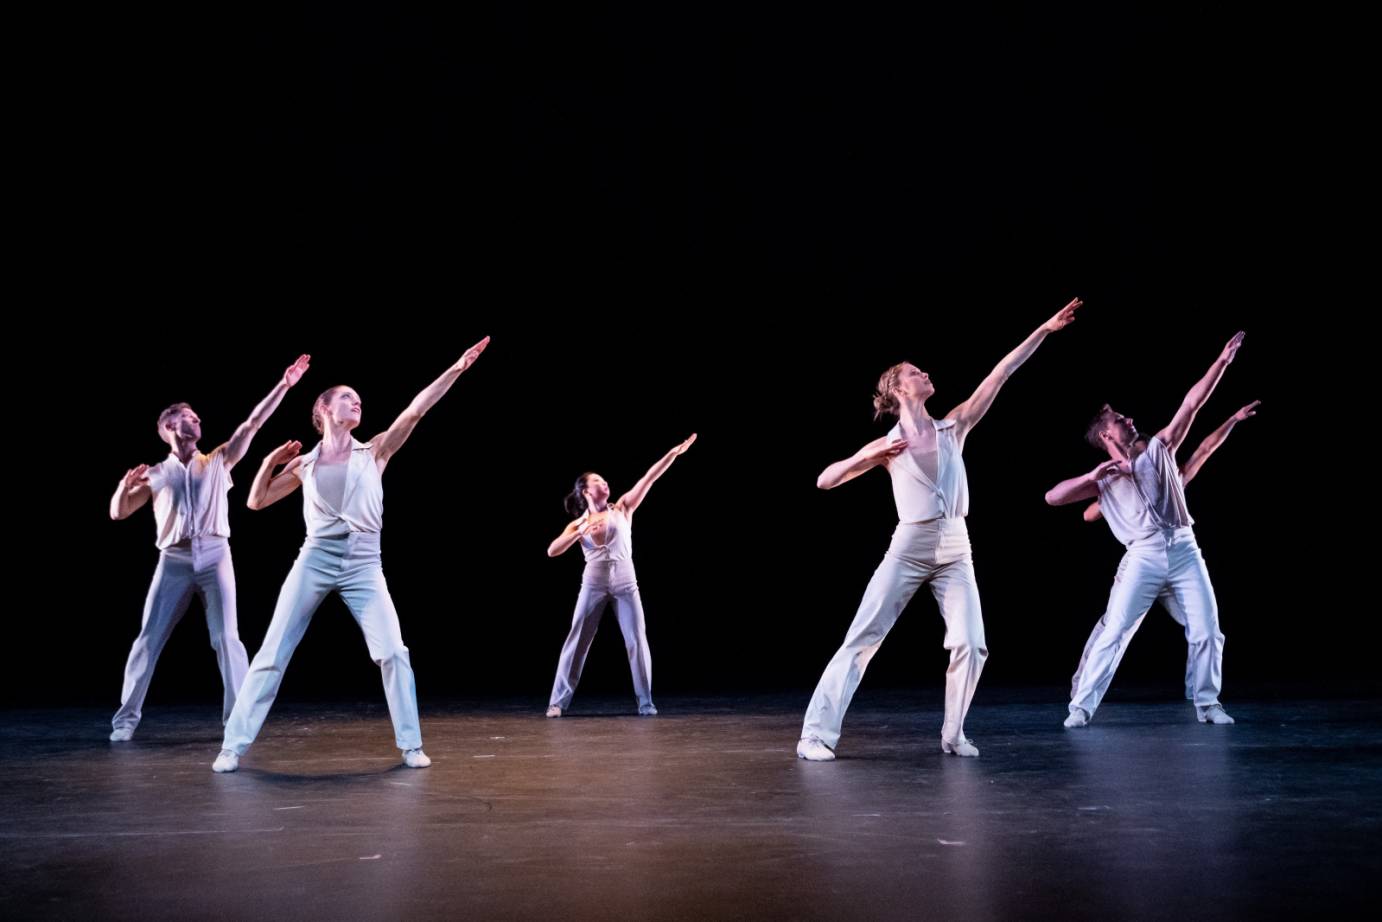 A group of dancers in white pants in tops stand in a wide stance. Their left arm is placed on a high diagonal while their right arm is bent at the elbow.